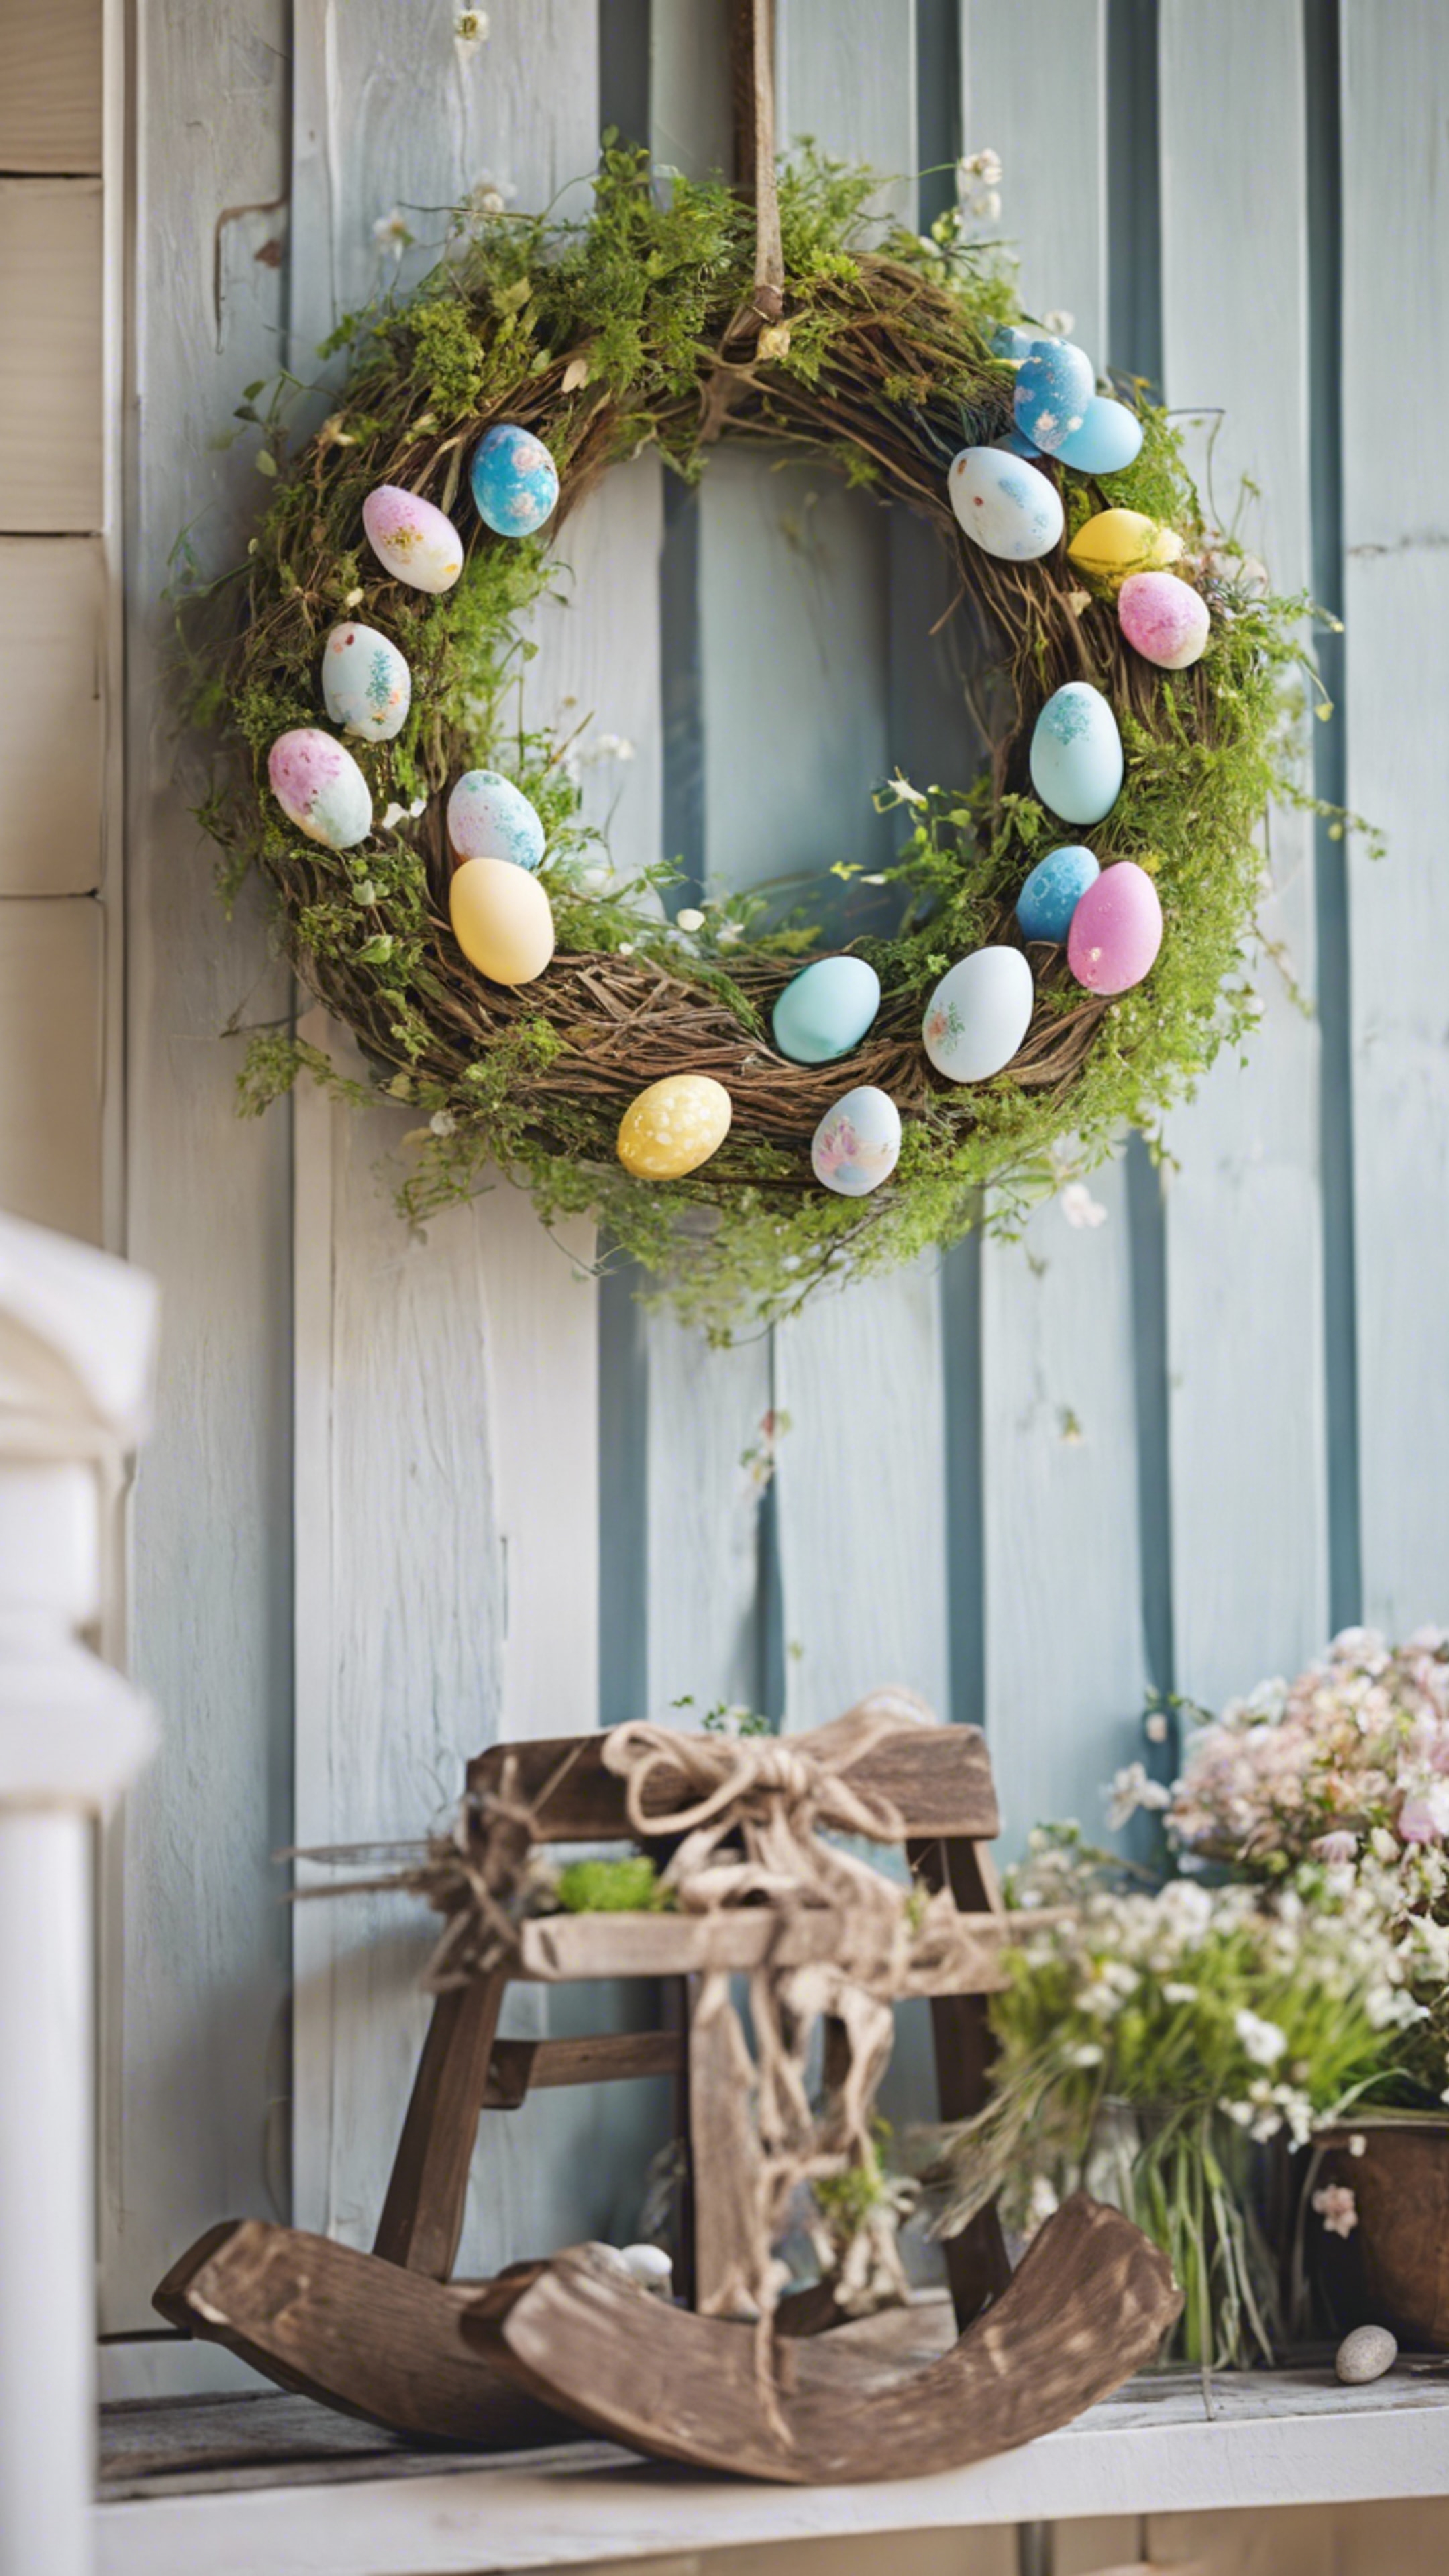 Country-style Easter decorative wreath hanging on a front porch, inviting the spring spirits. Tapéta[efa72fd9539f4de39955]